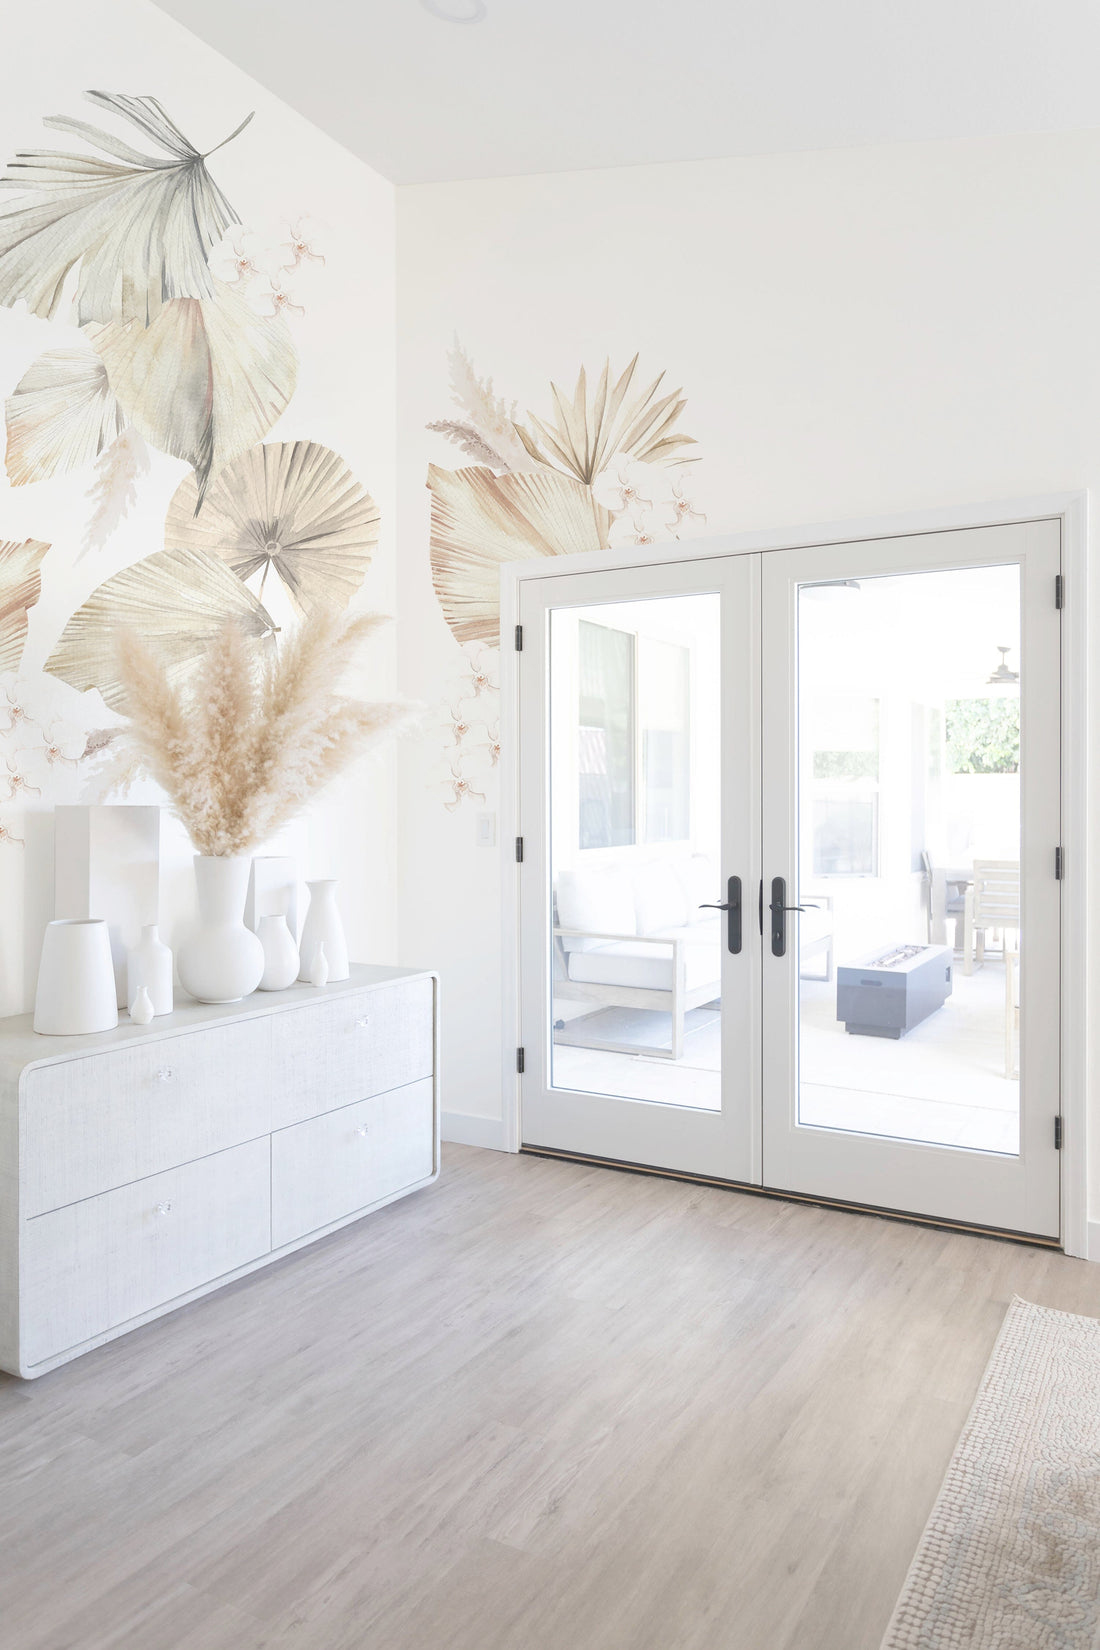 Collaboration with Pella Doors